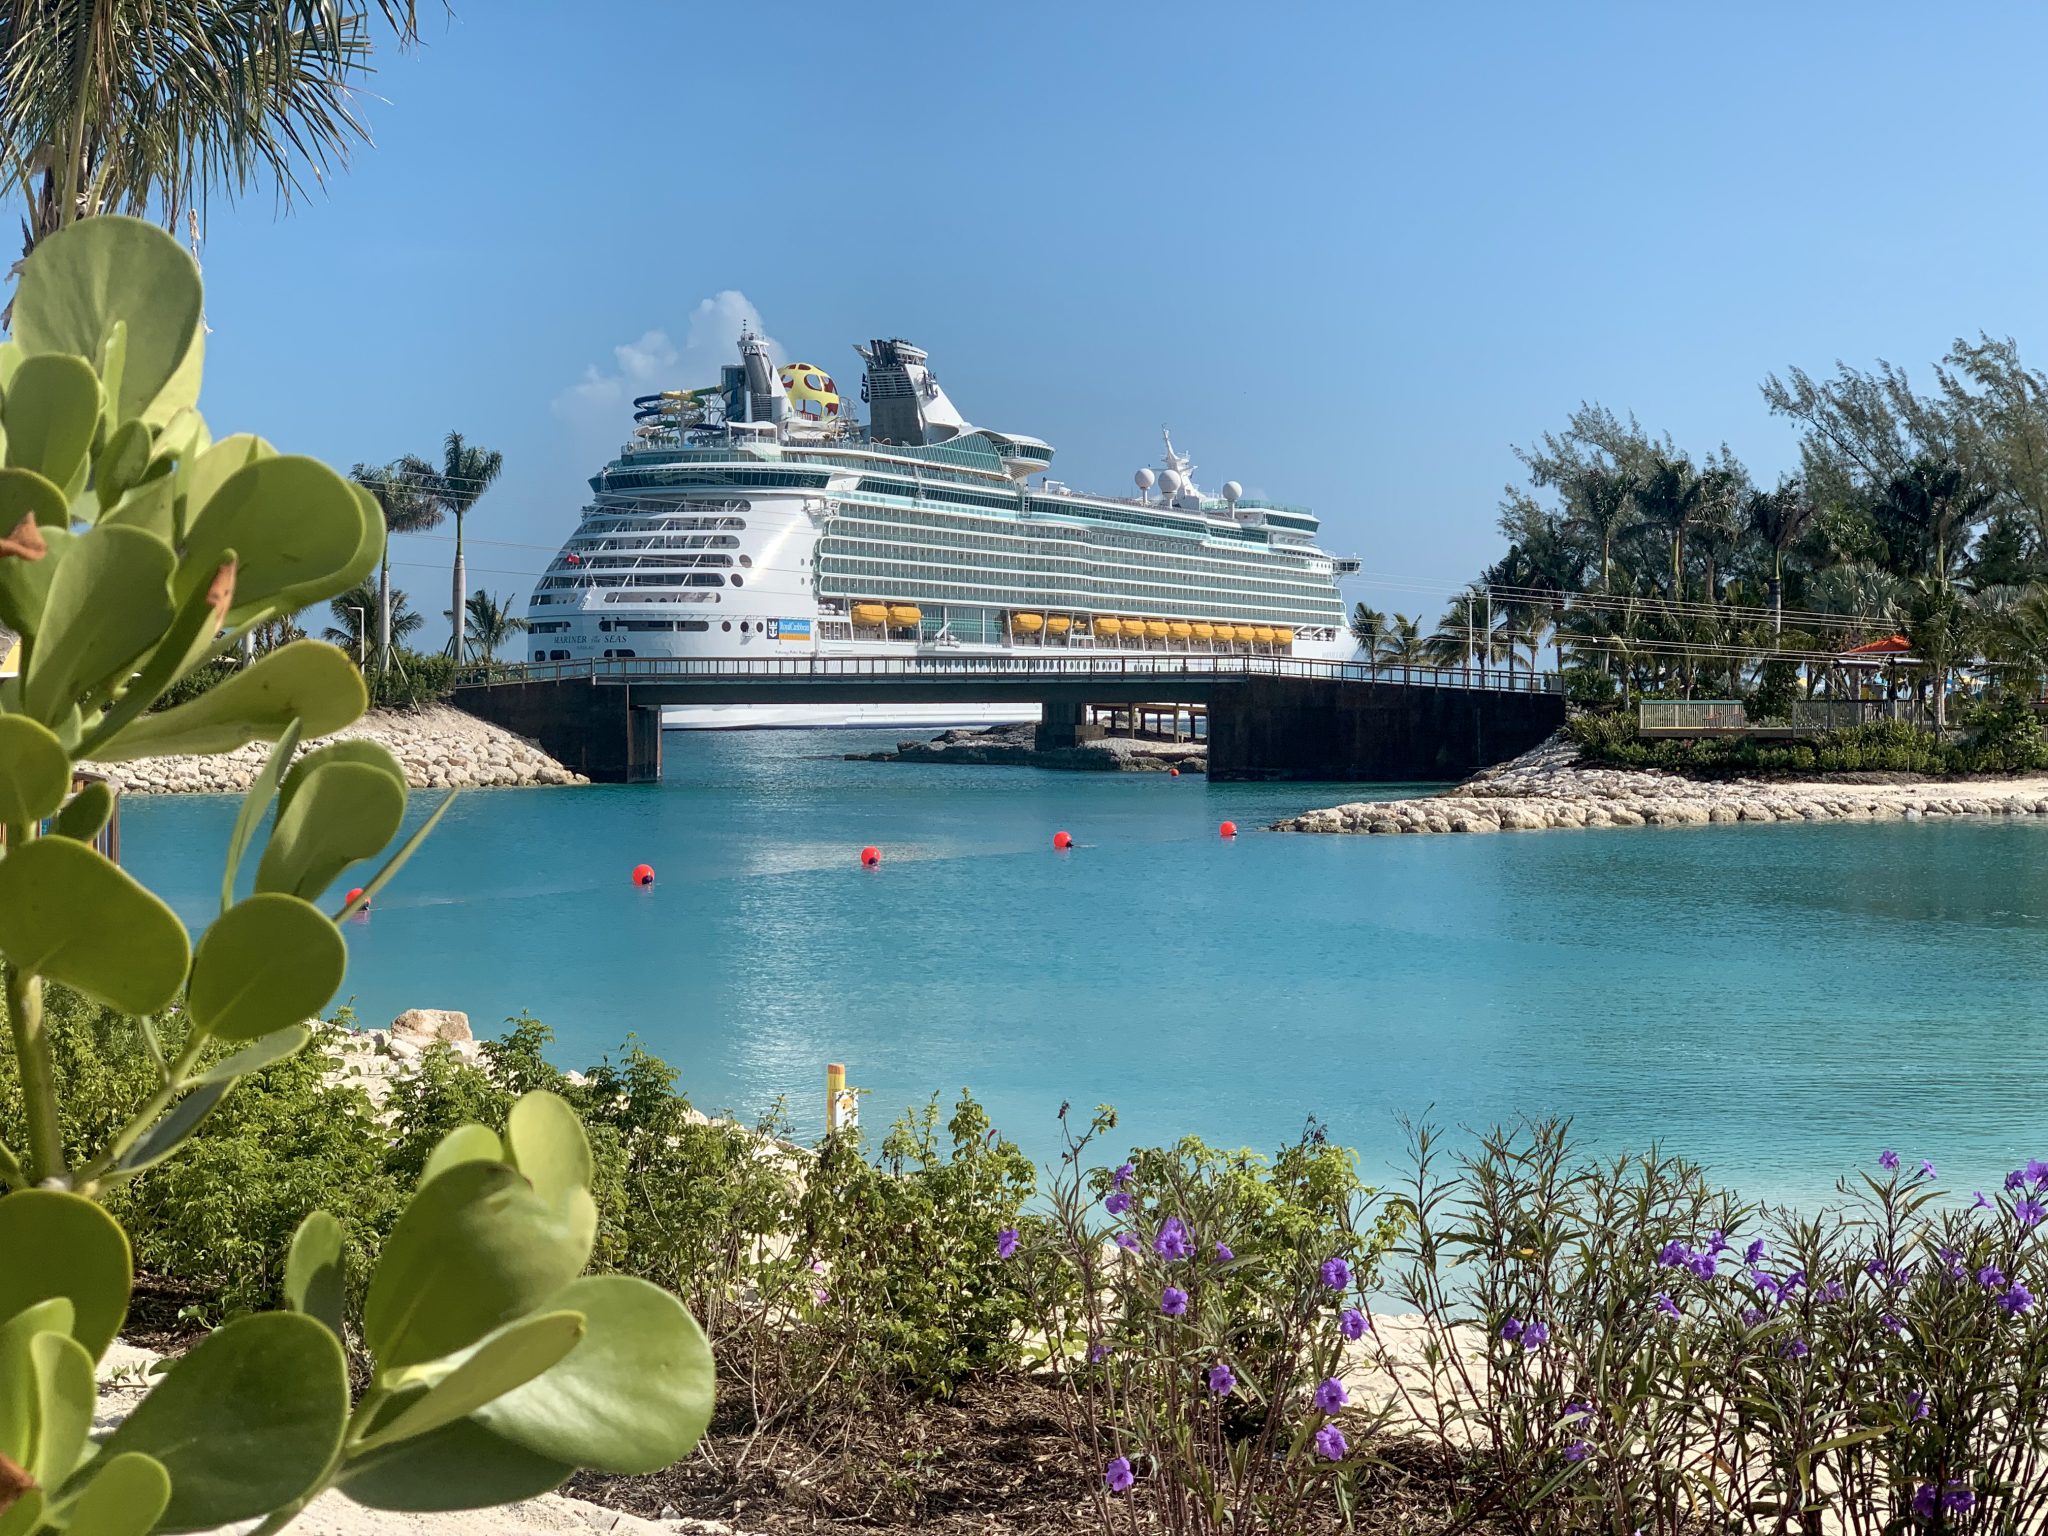 Royal Caribbean cruise ship docked at their private island